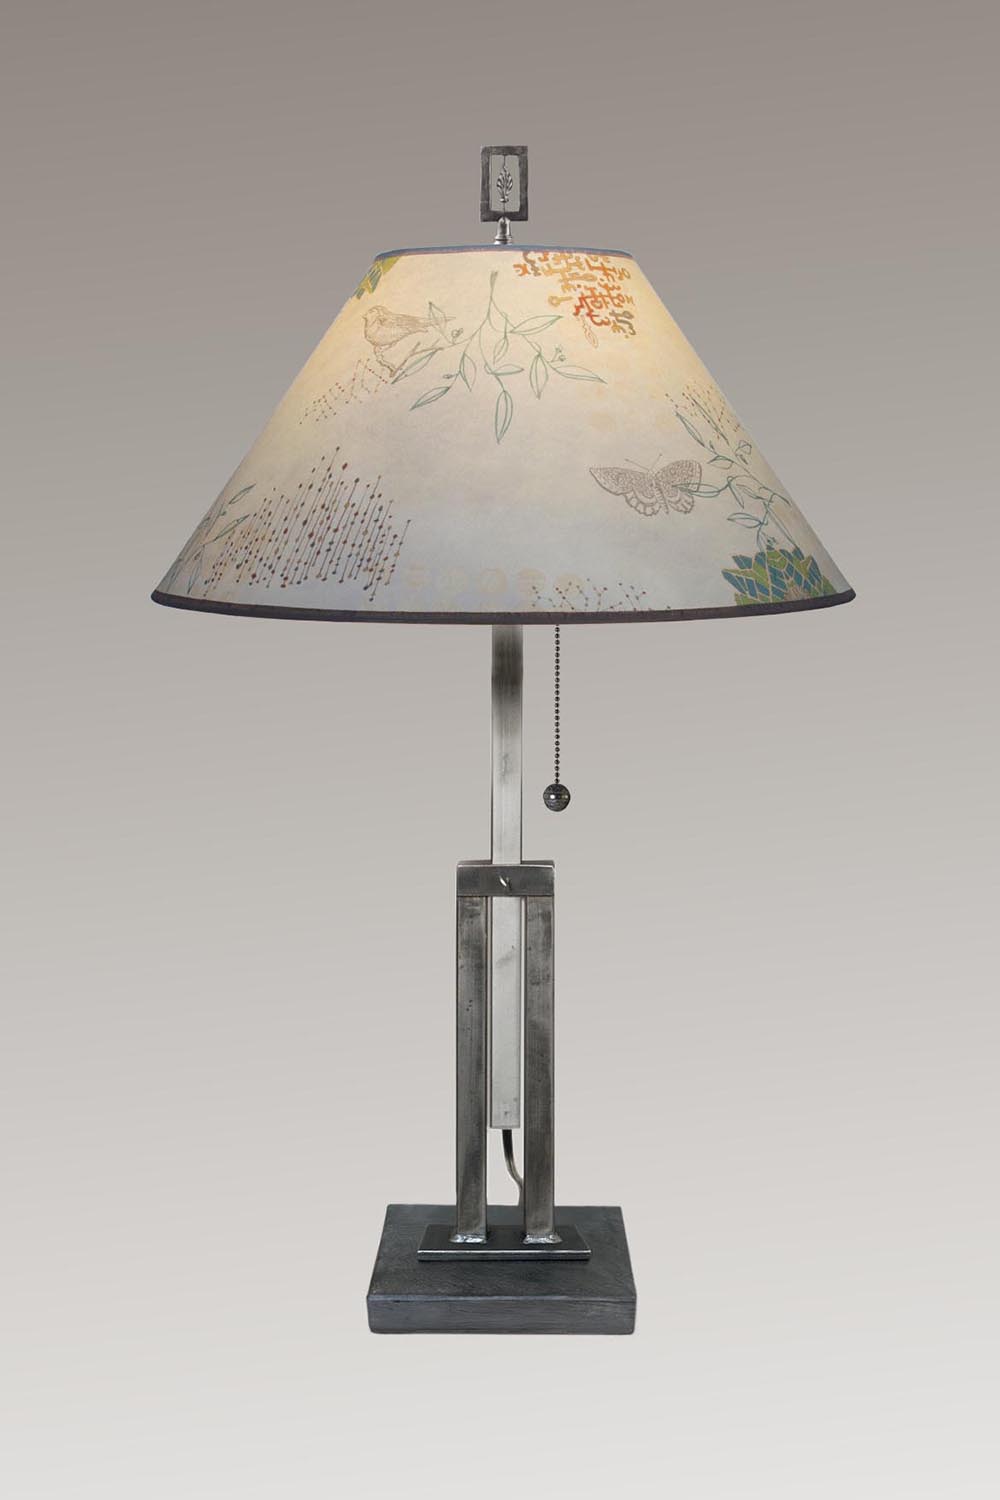 Janna Ugone & Co Table Lamps Adjustable-Height Steel Table Lamp with Large Conical Shade in Ecru Journey